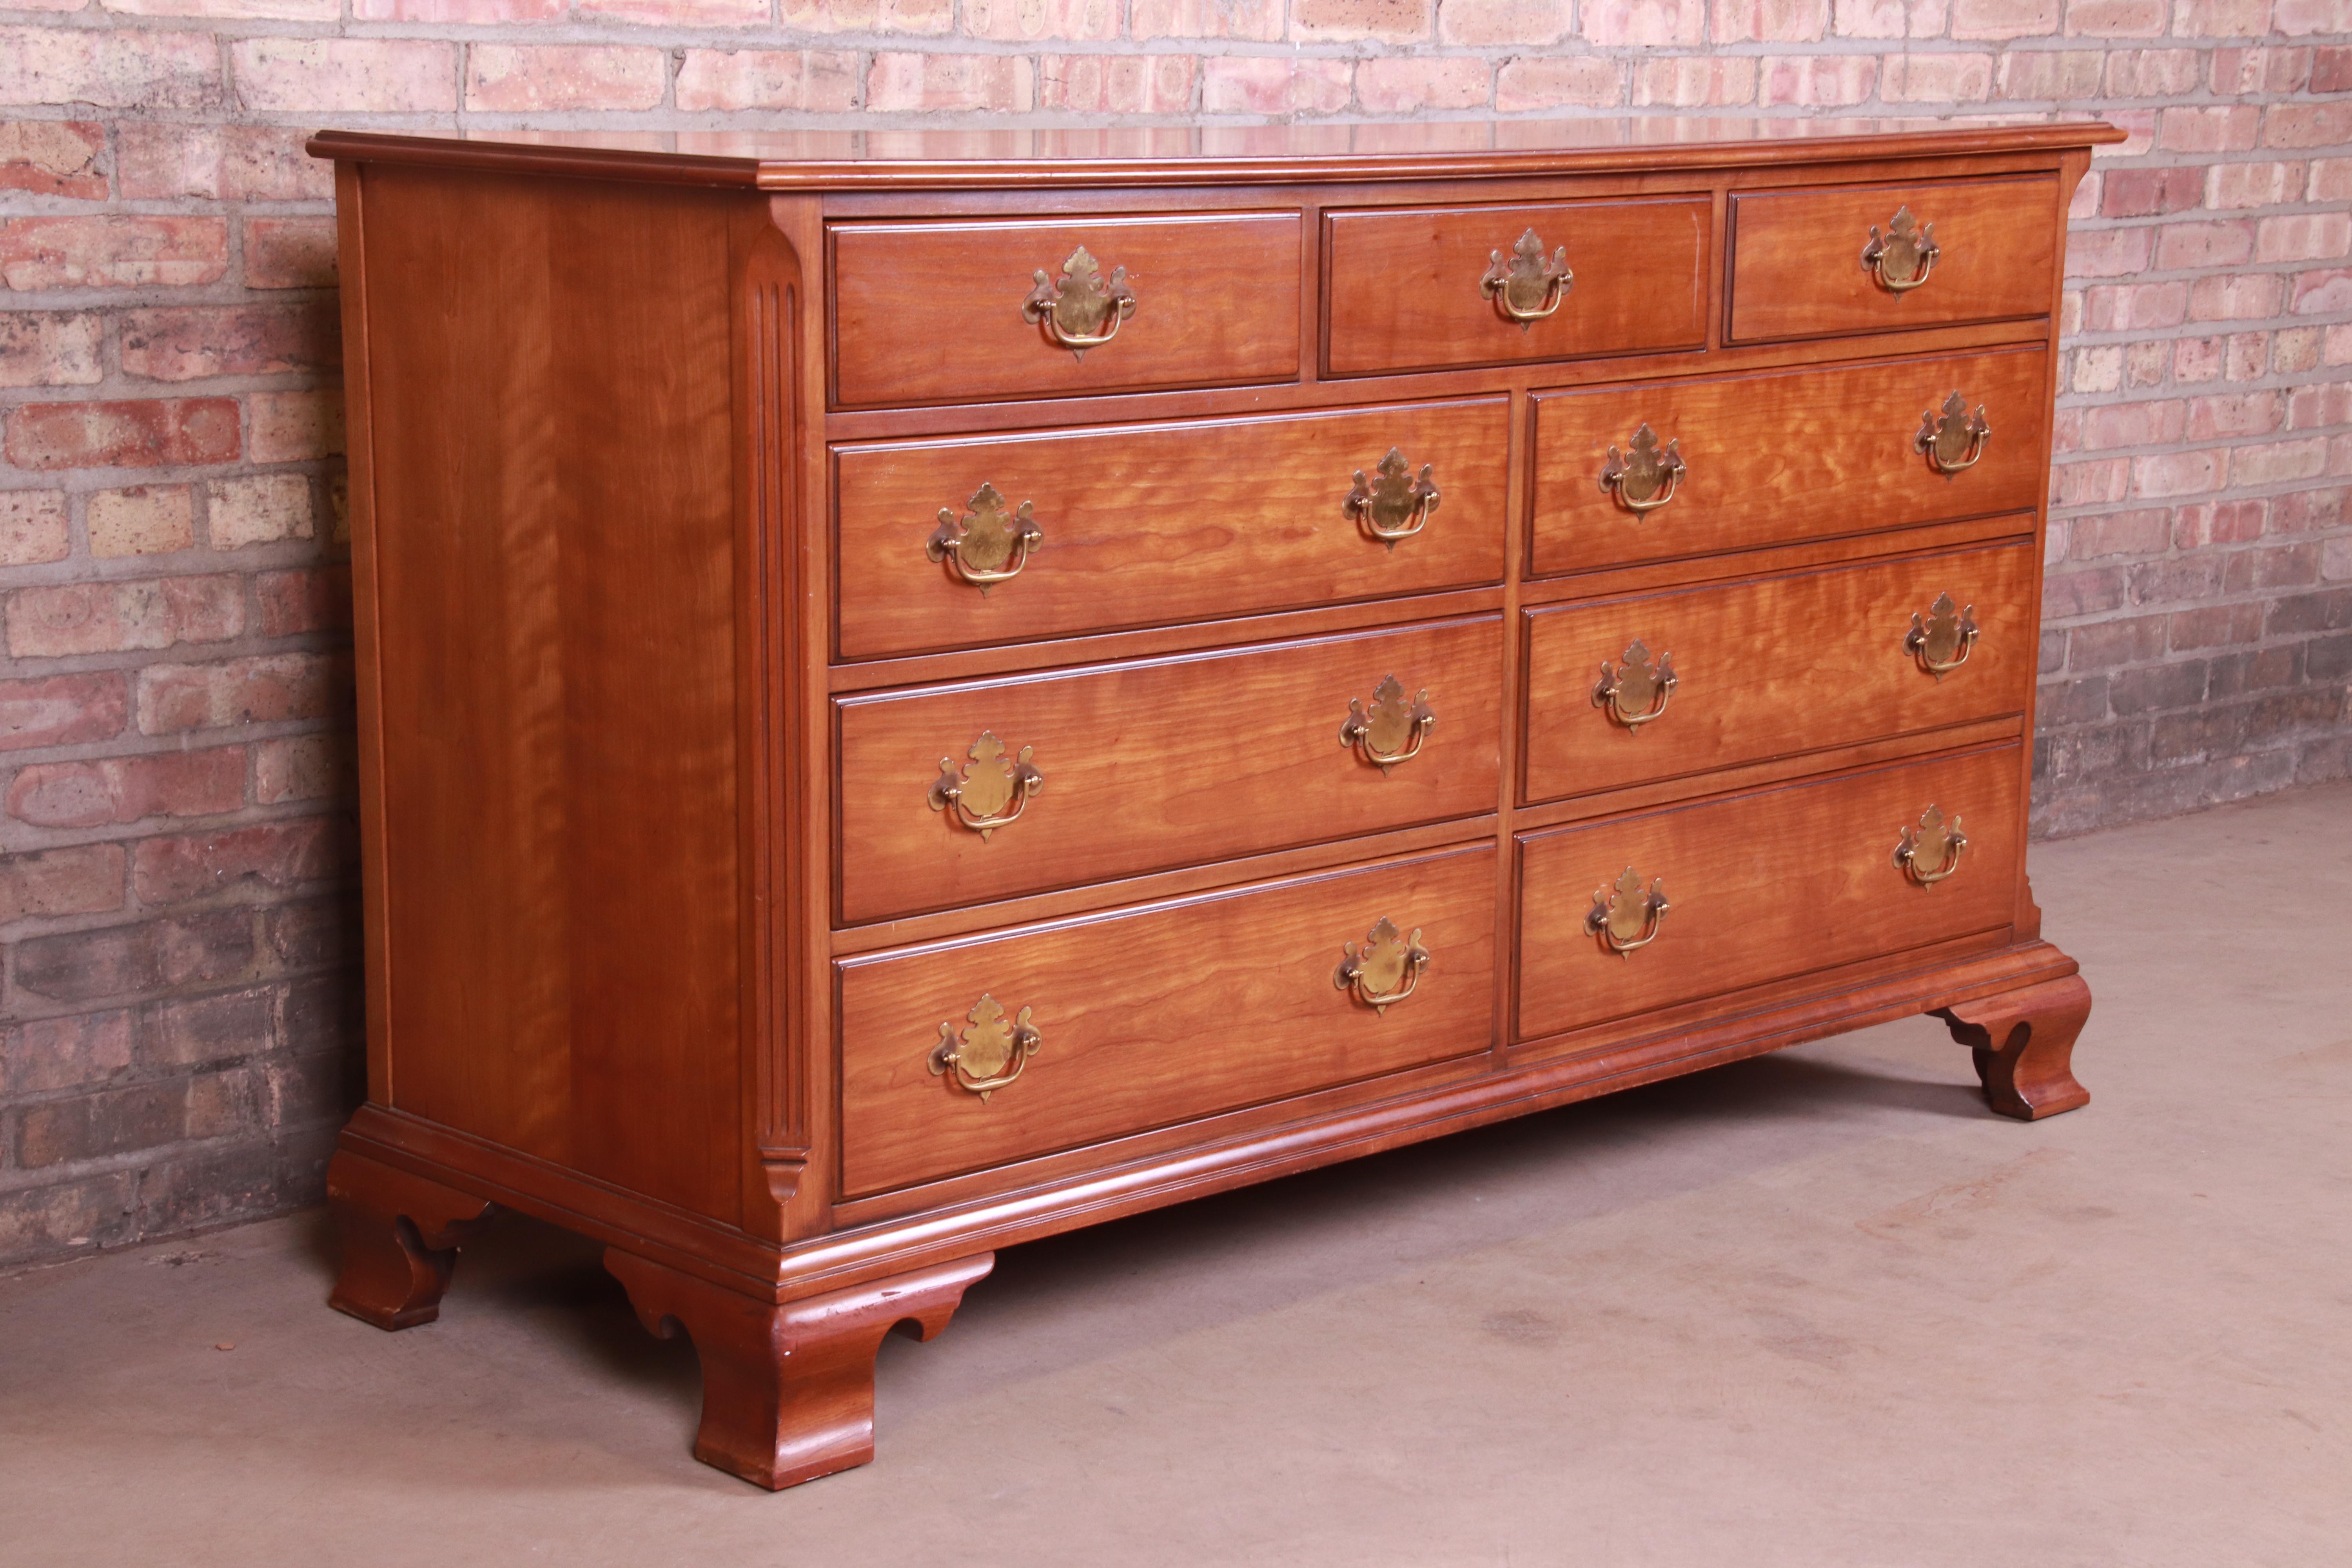 Brass Kindel Furniture American Chippendale Solid Cherry Wood Dresser or Credenza